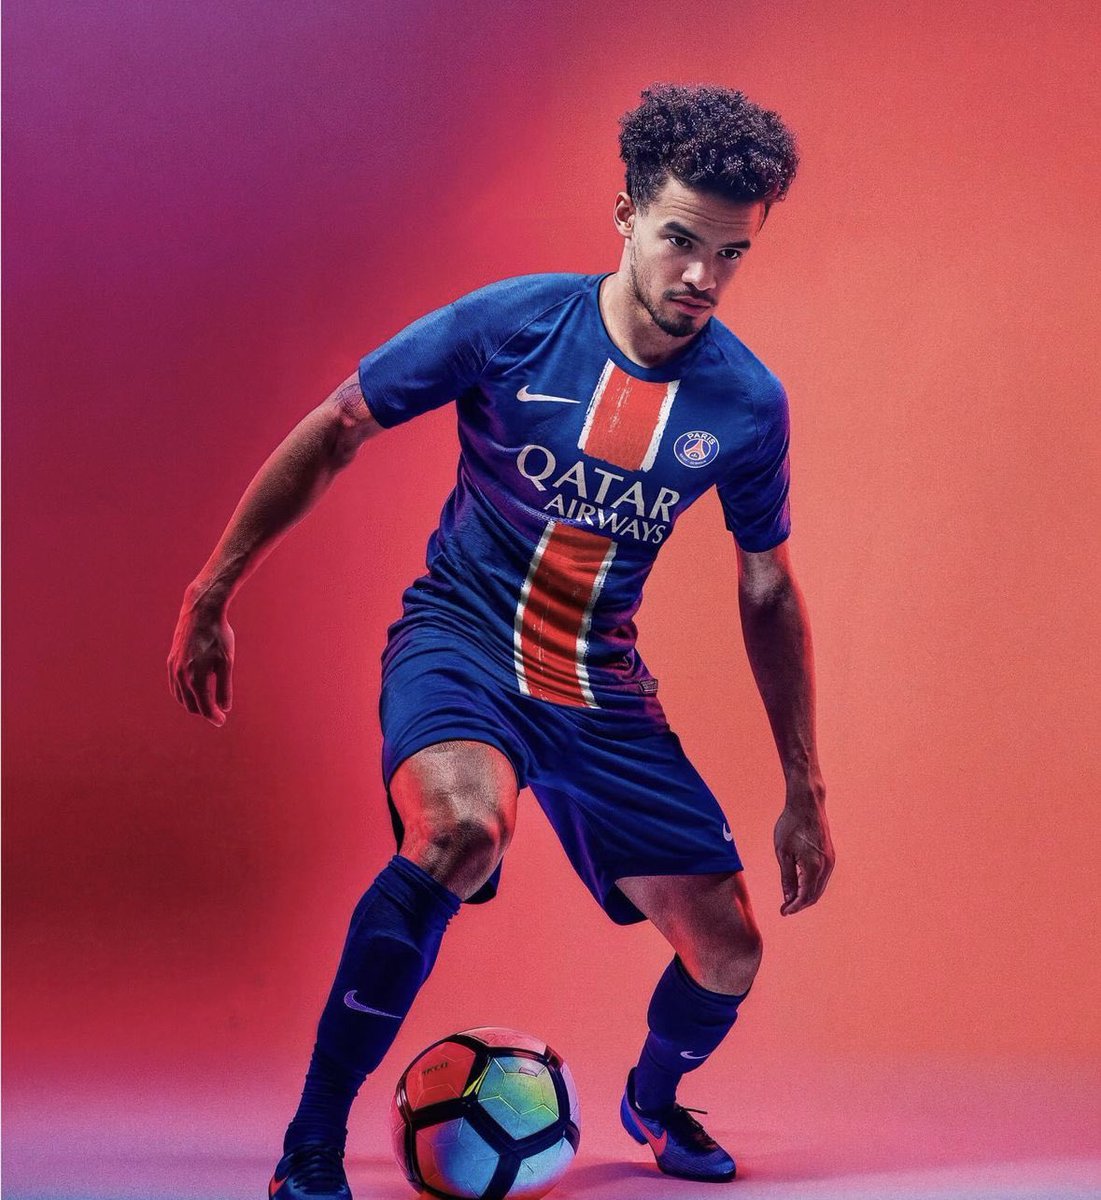 PSG’s new home shirt has dropped 🔵🔴